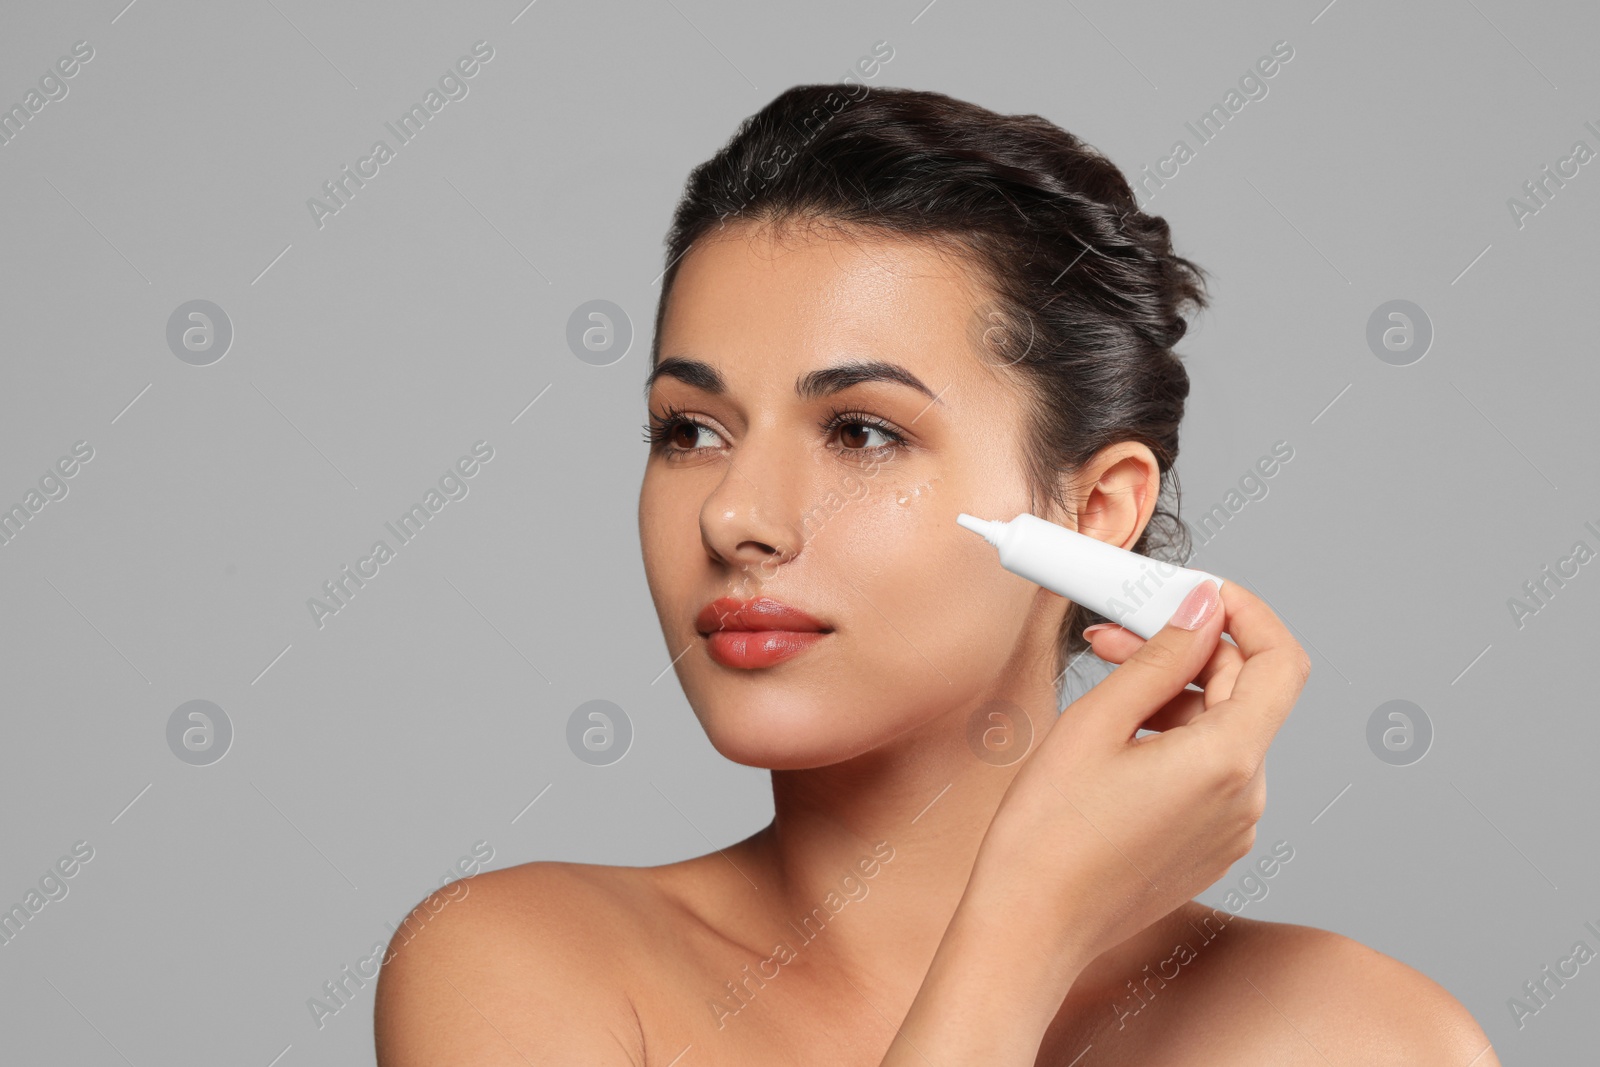 Photo of Woman applying cream under eyes on grey background, space for text. Skin care